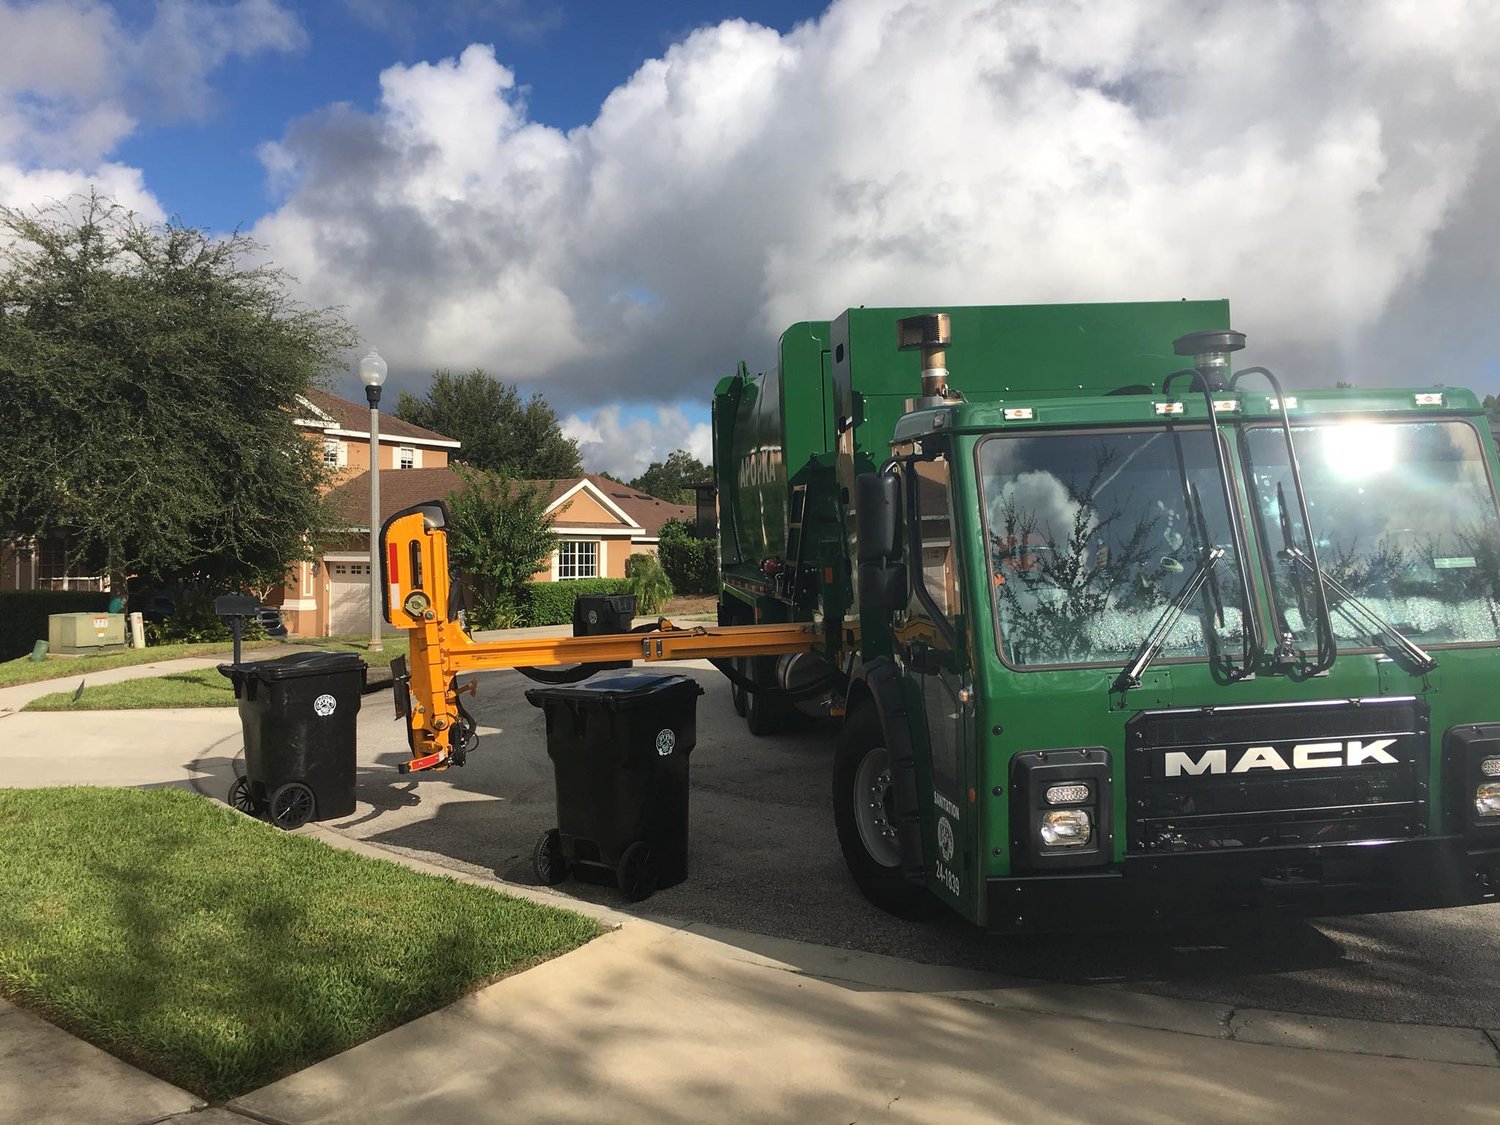 Apopka garbage collection schedule for Memorial Day announced The